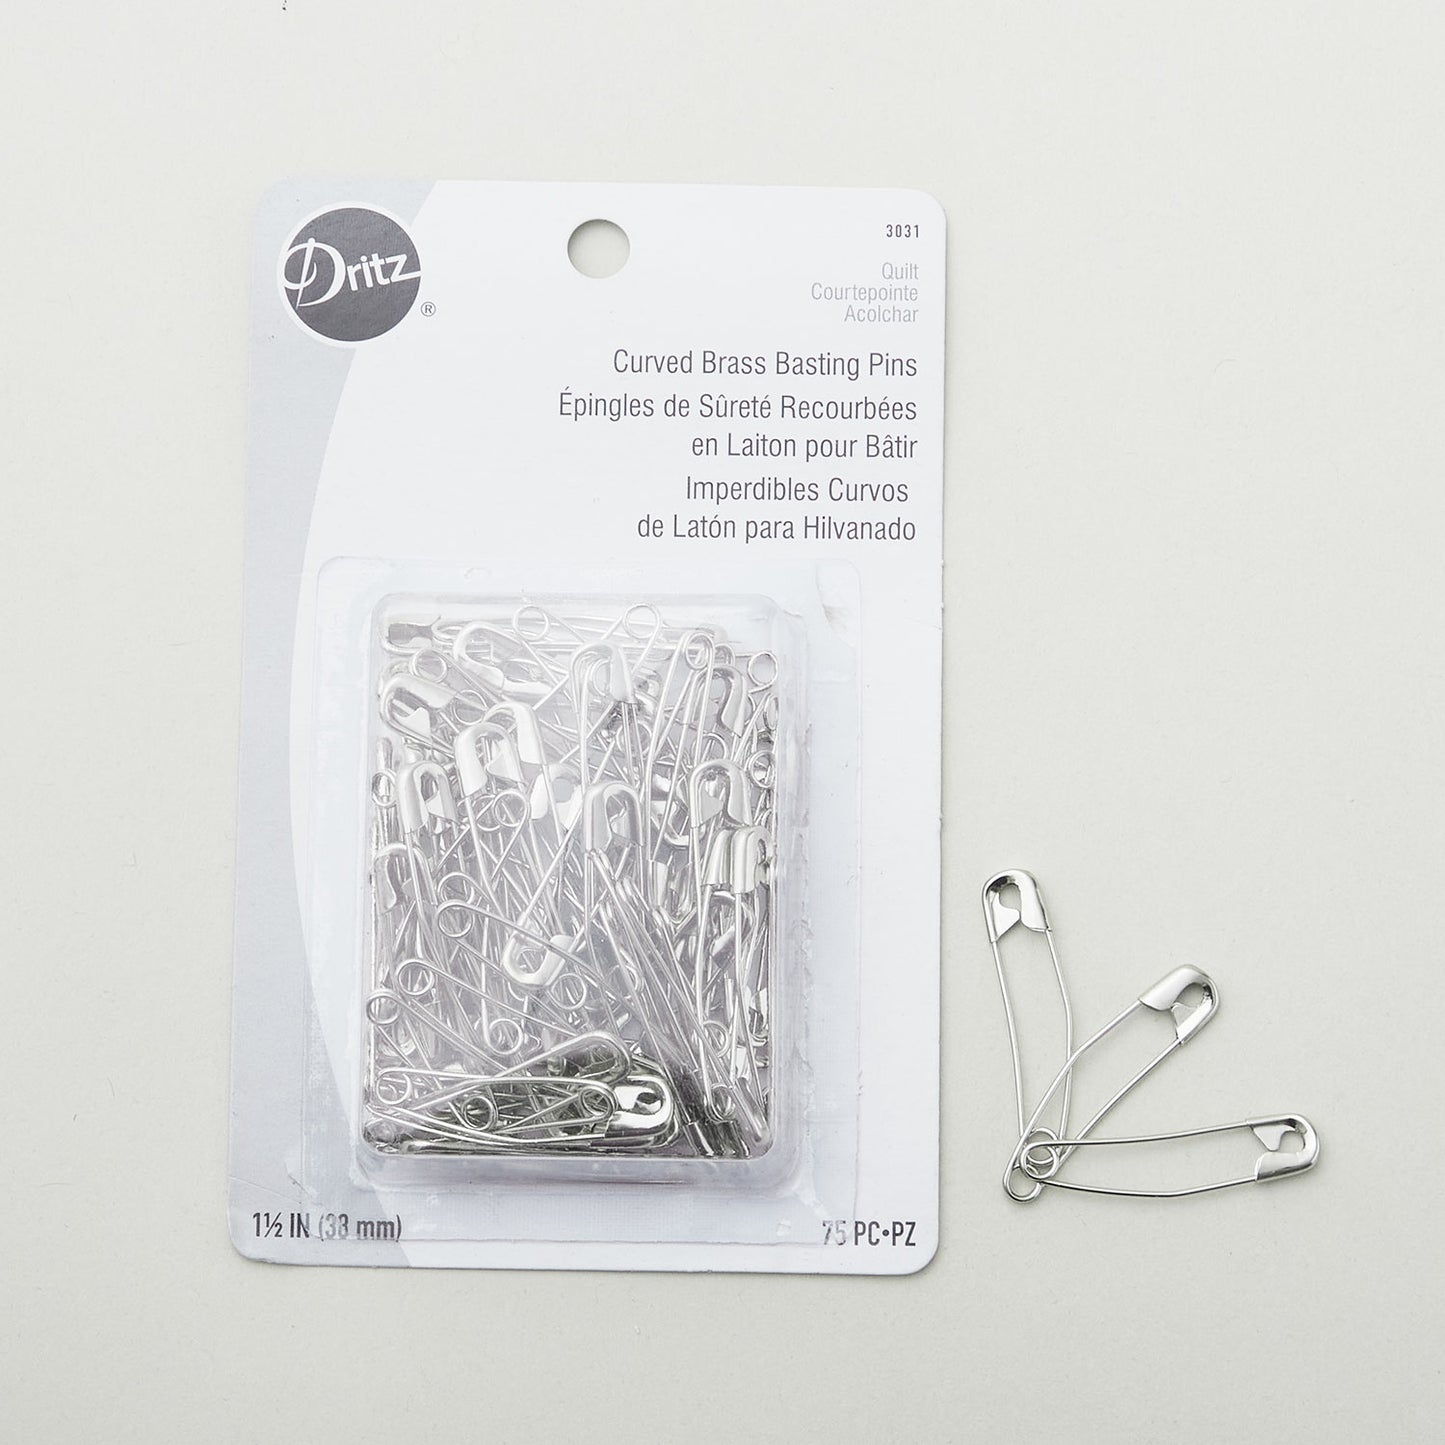 Dritz Curved Basting Pins - Size 2 Alternative View #1